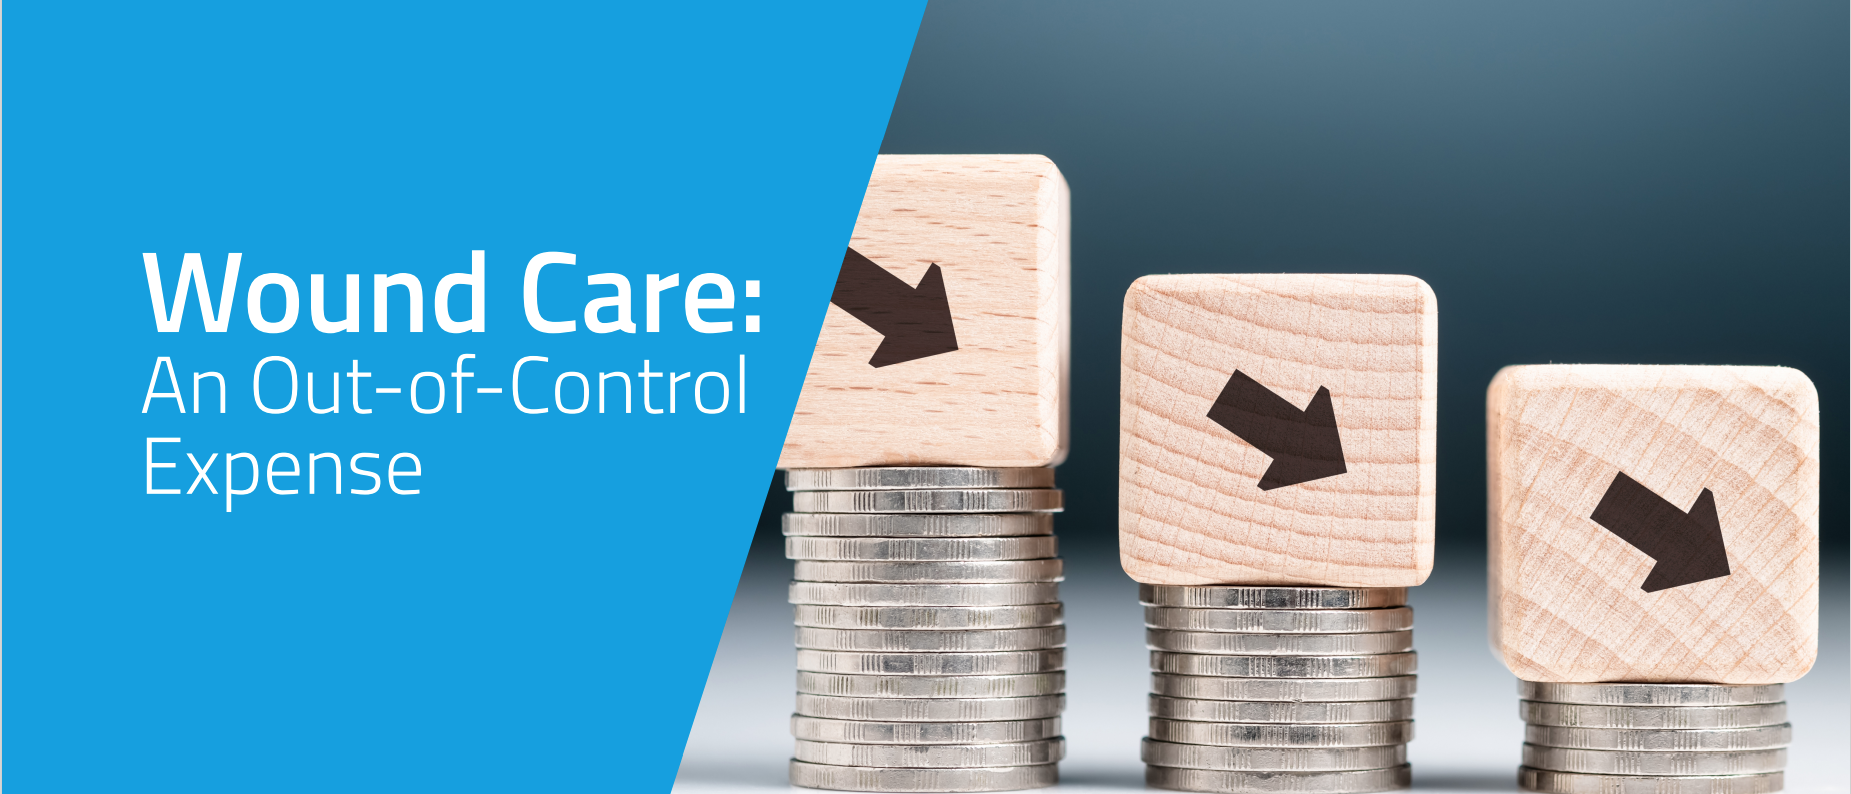 Wound care costs 